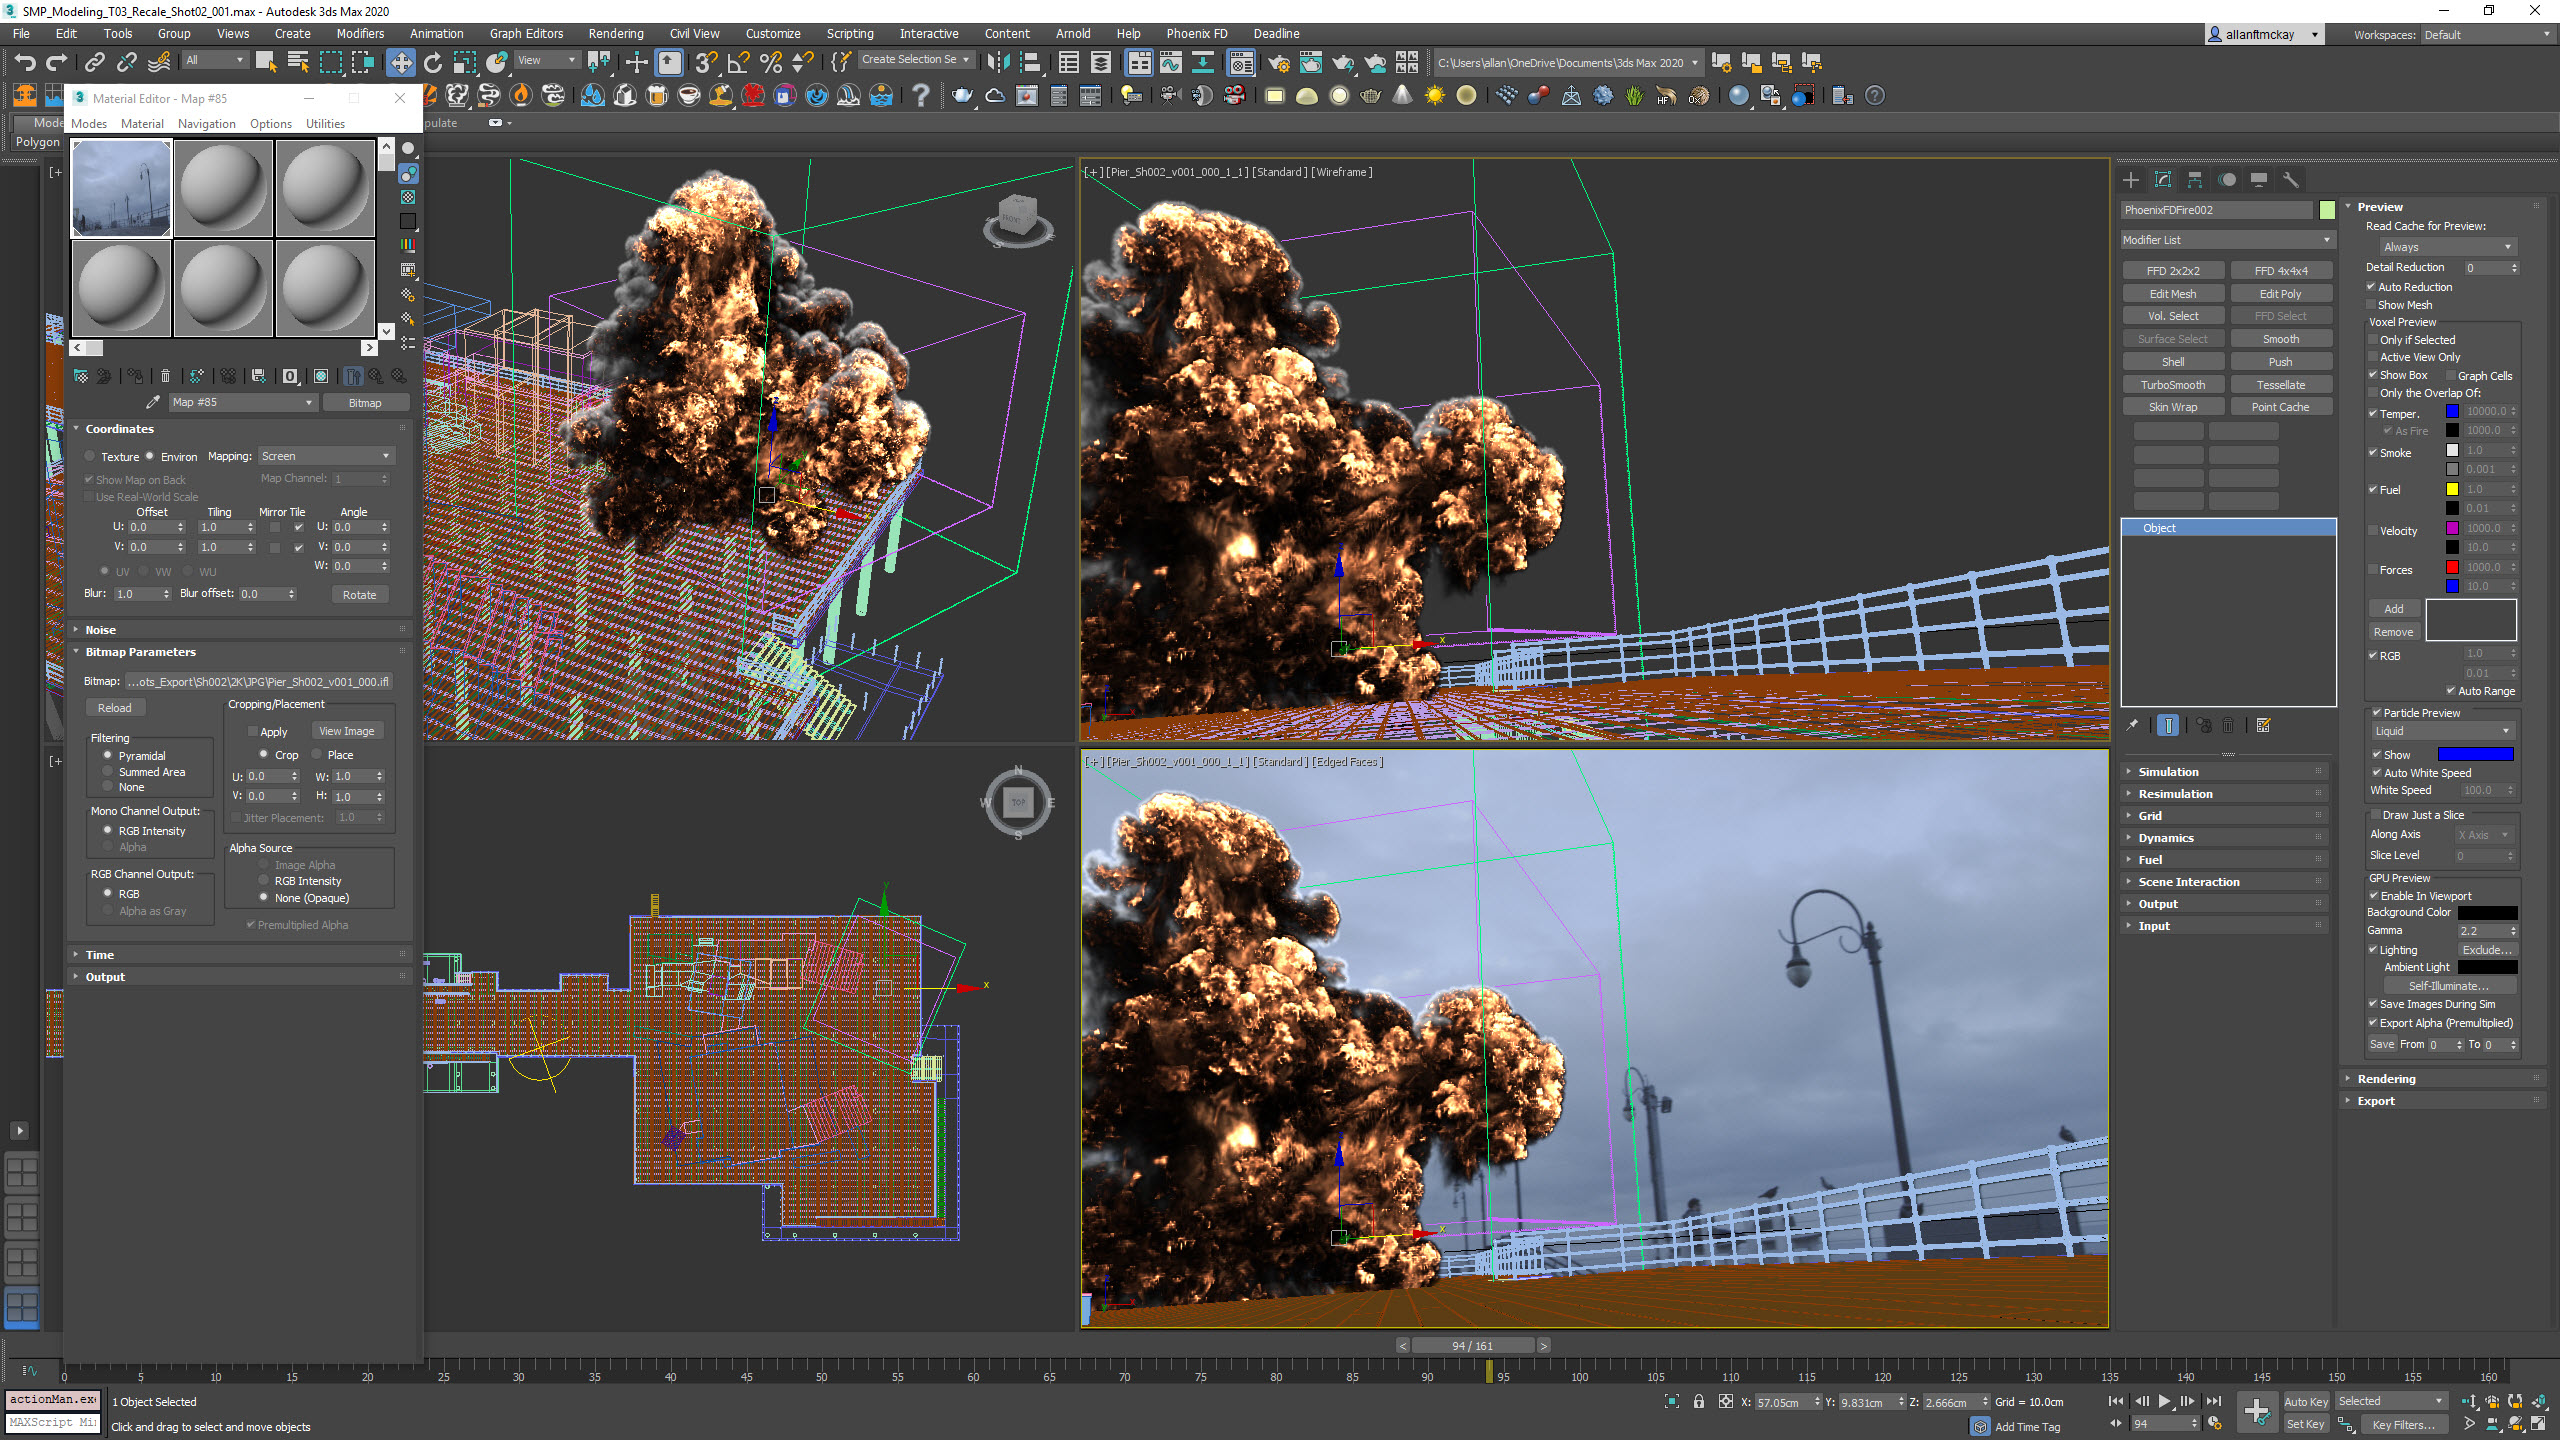 BLK360 point cloud data used in VFX program